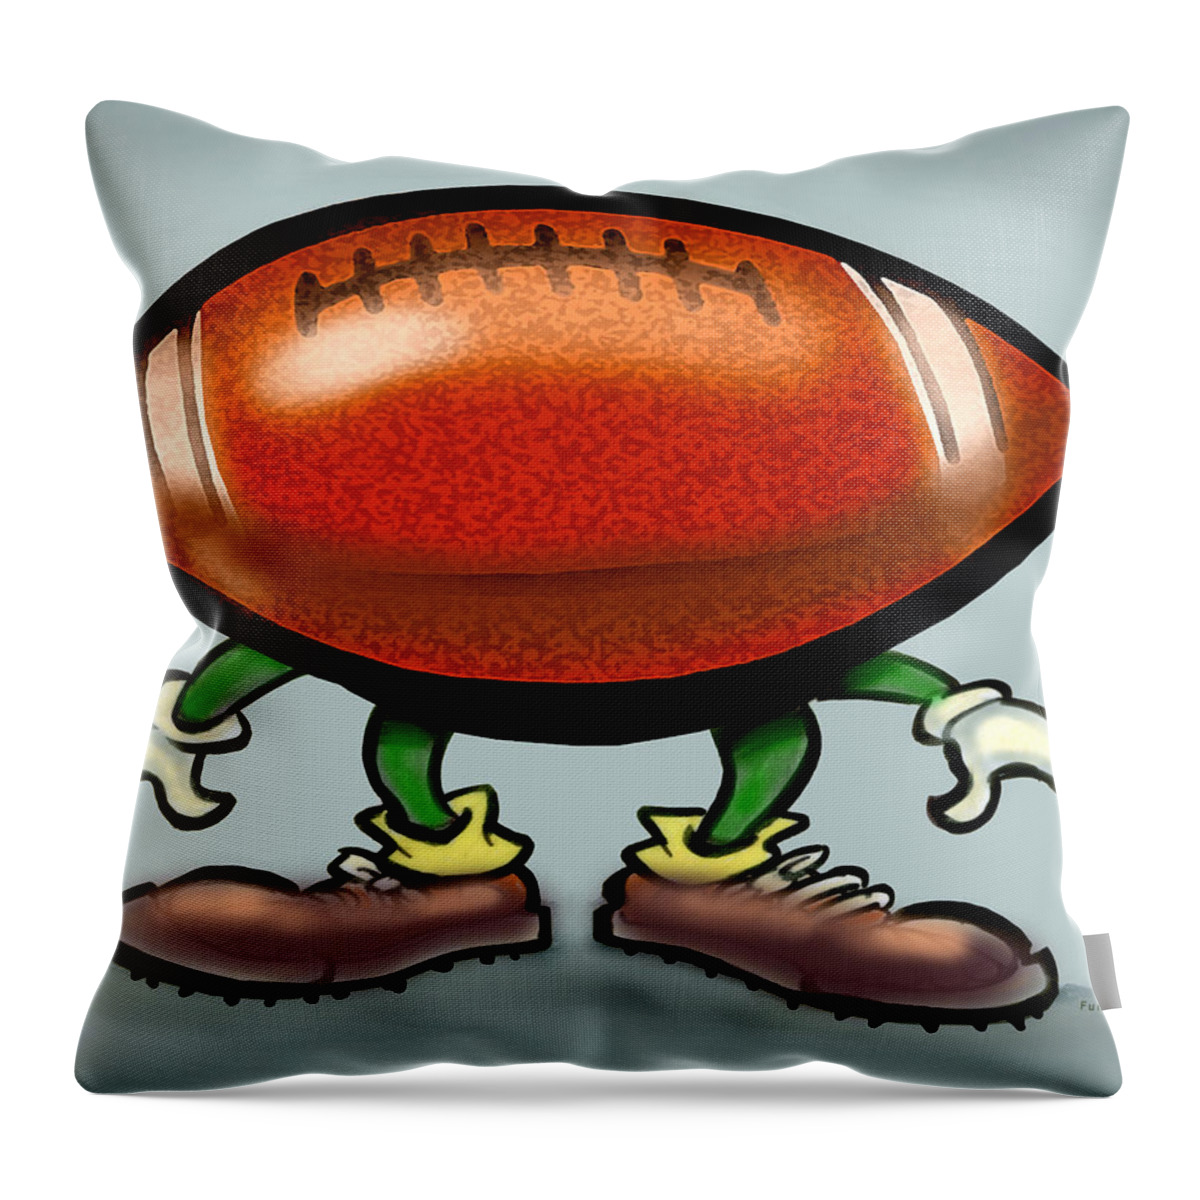 Football Throw Pillow featuring the digital art Football #1 by Kevin Middleton